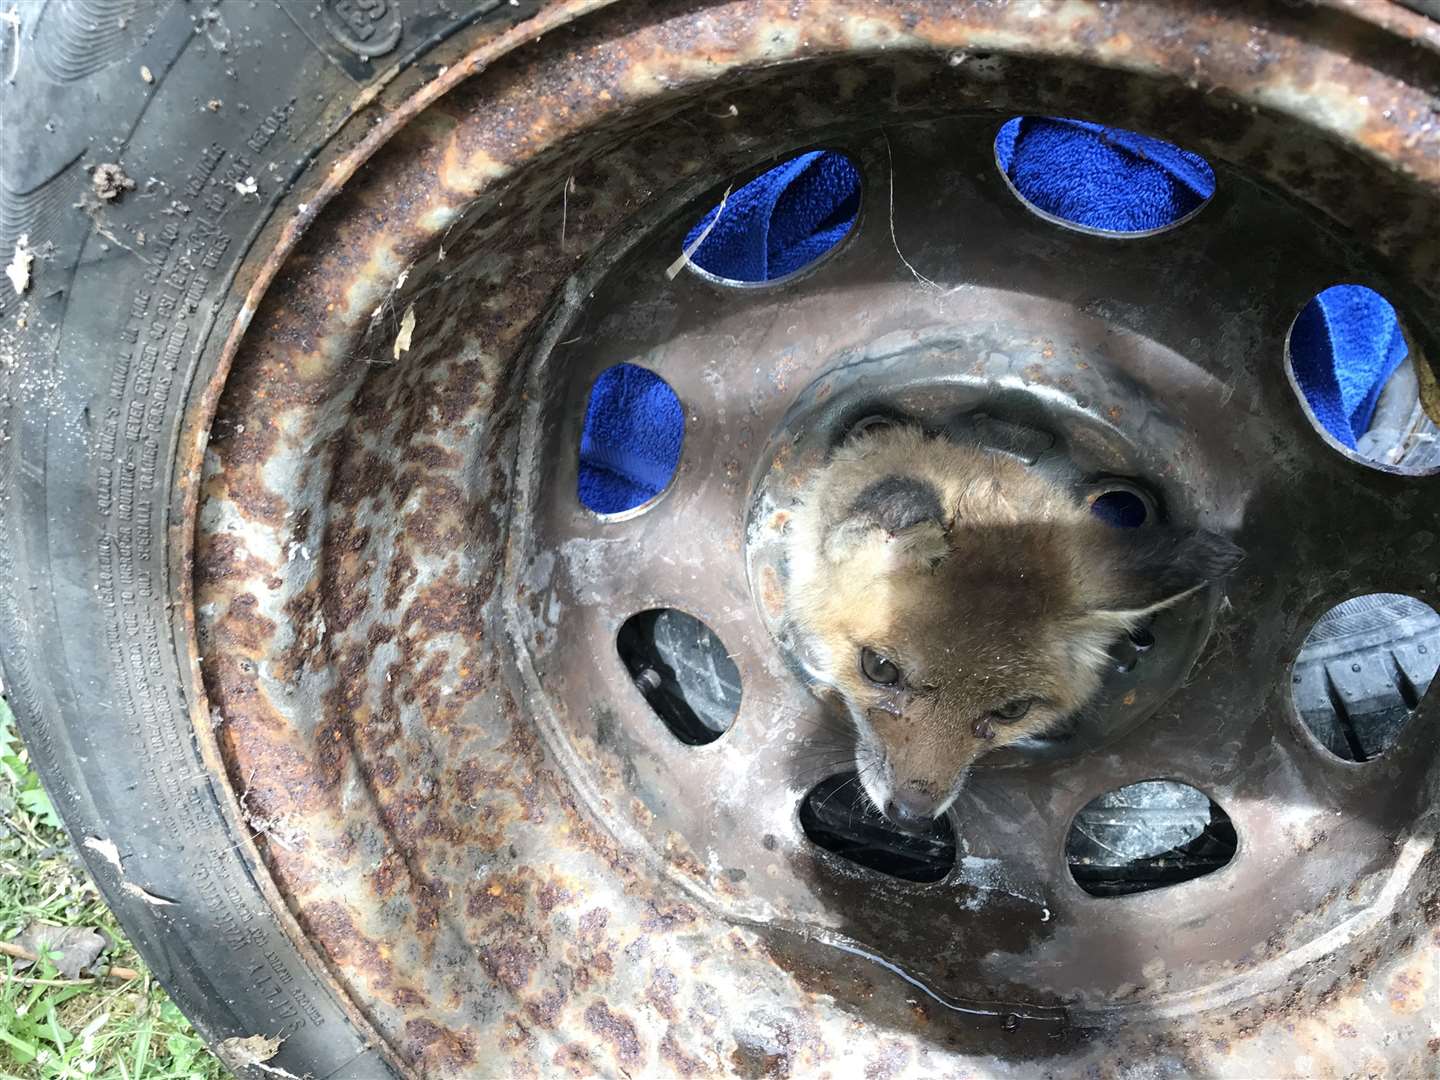 The fox cub with its head stuck through a car wheel. Images from RSPCA